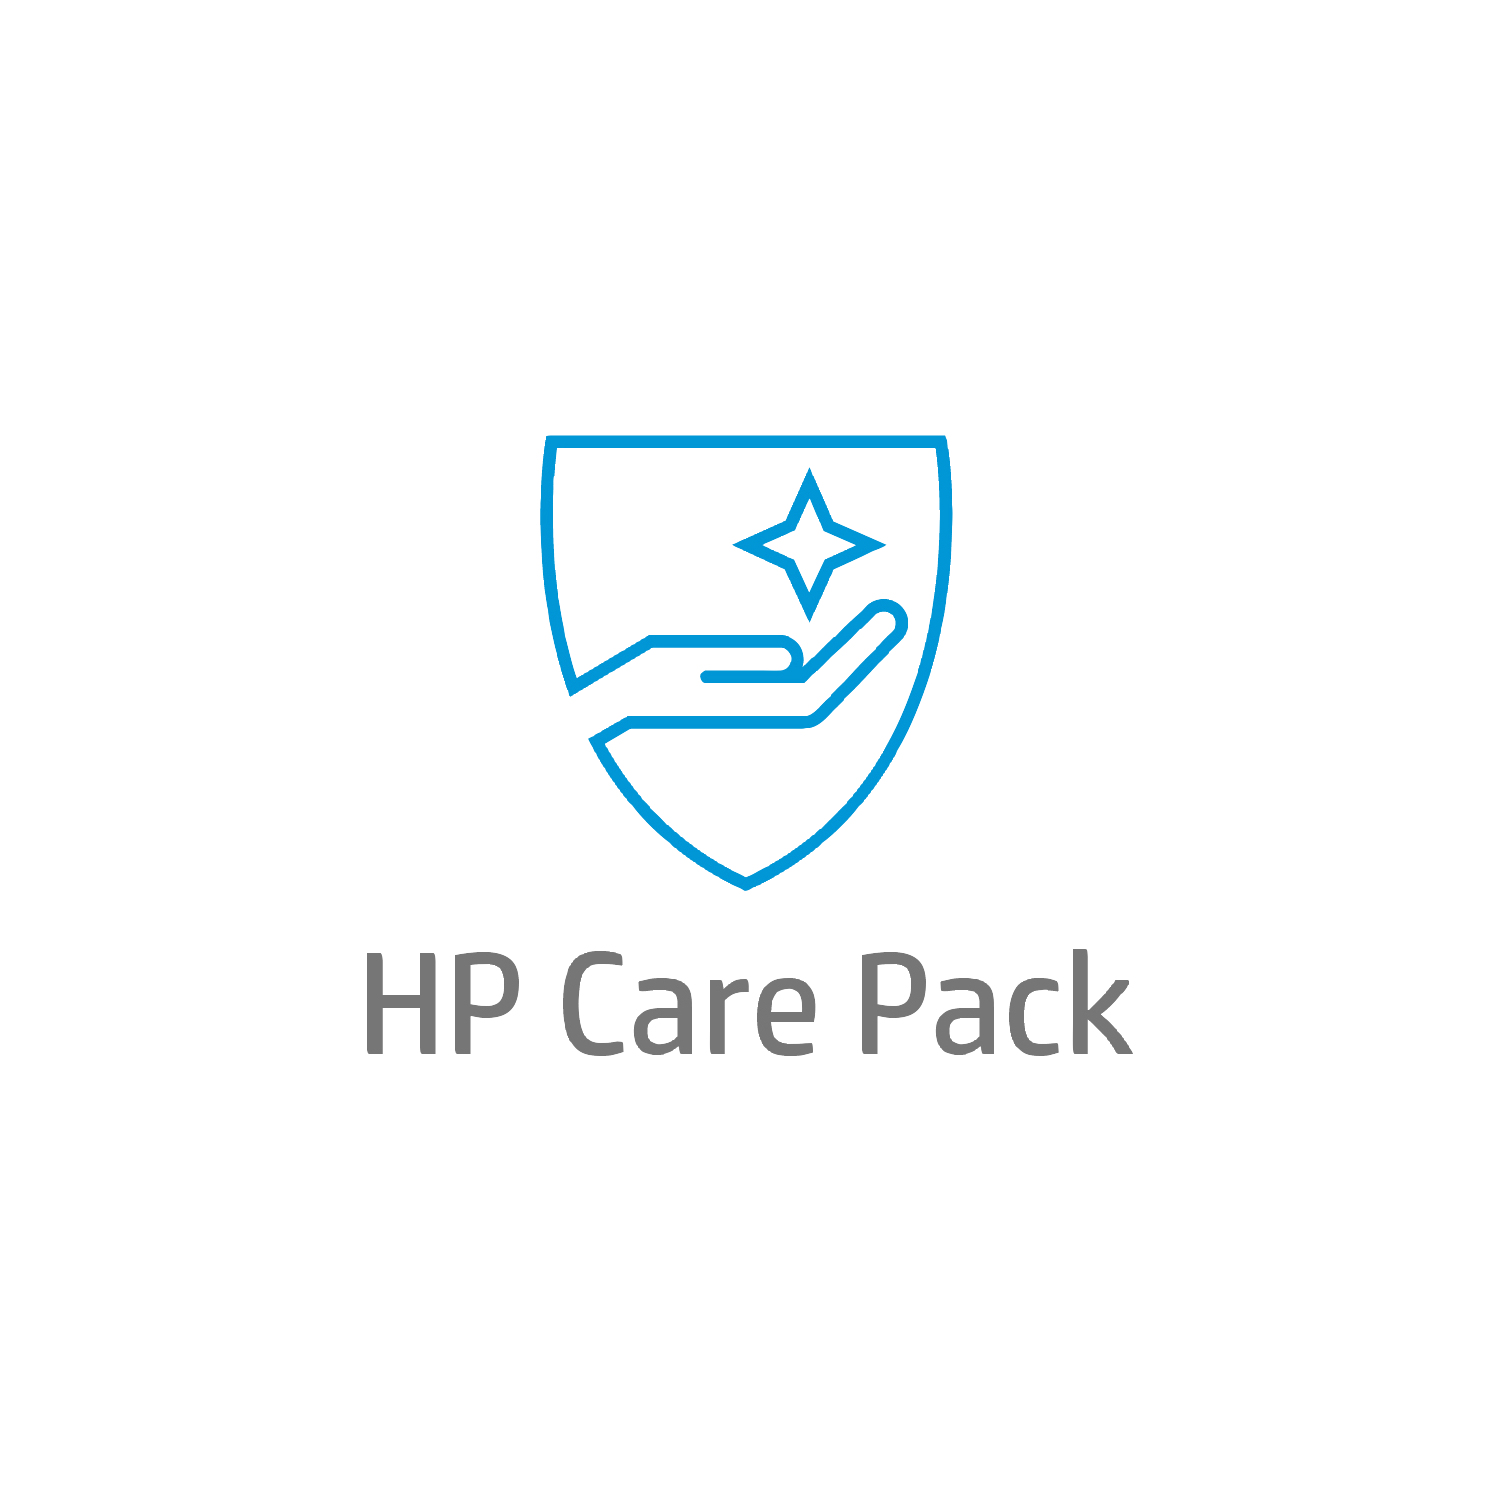 Electronic HP Care Pack Installation Service